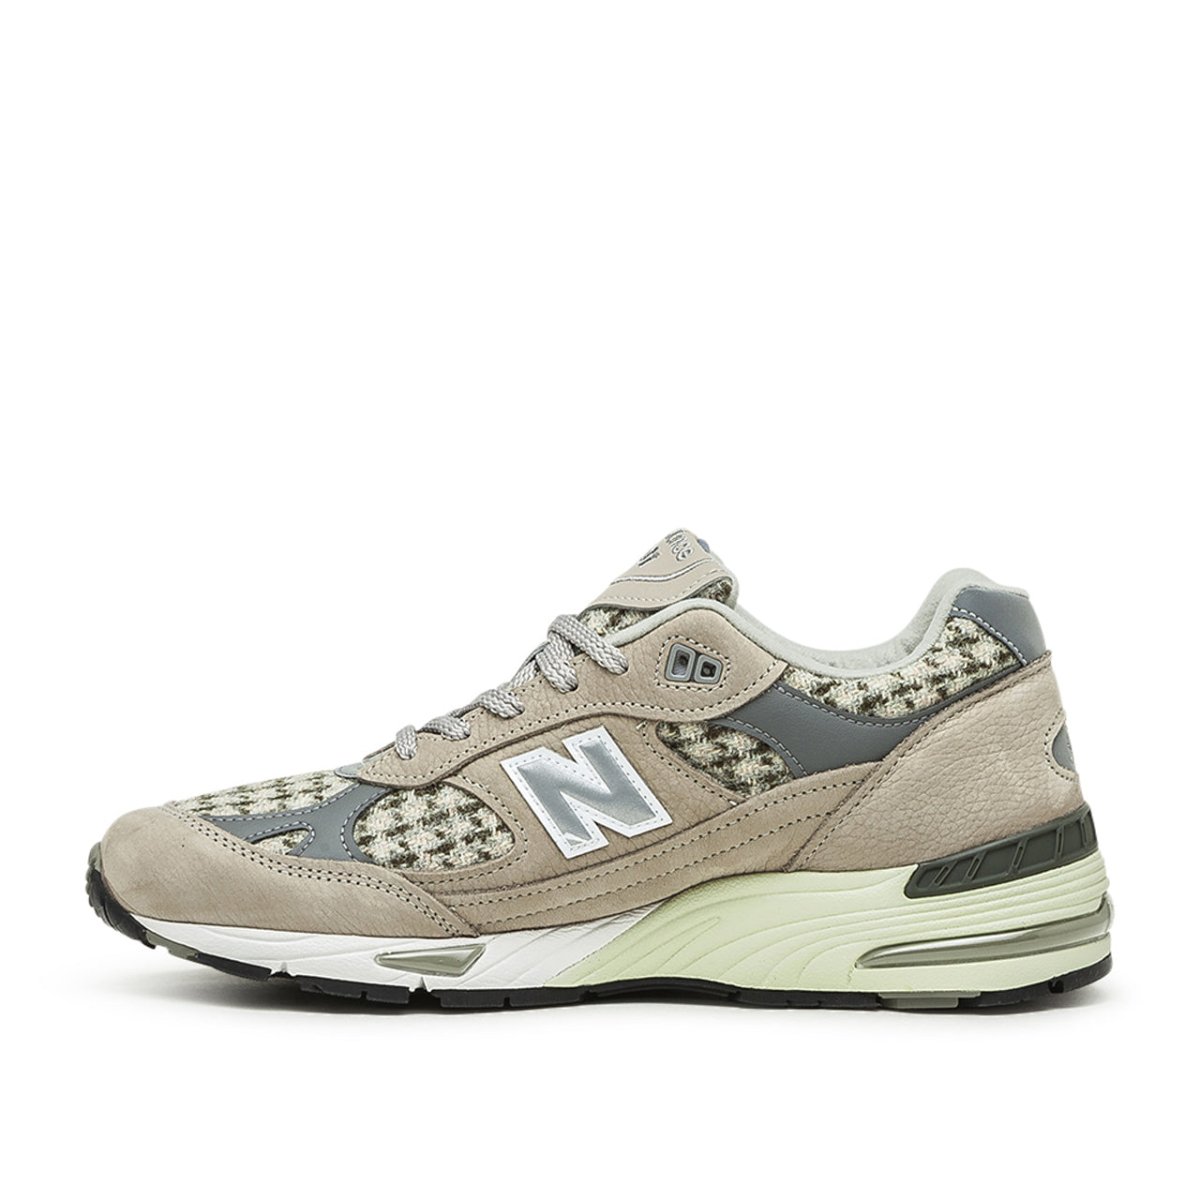 New Balance M991HT Made in England (Beige)  - Allike Store